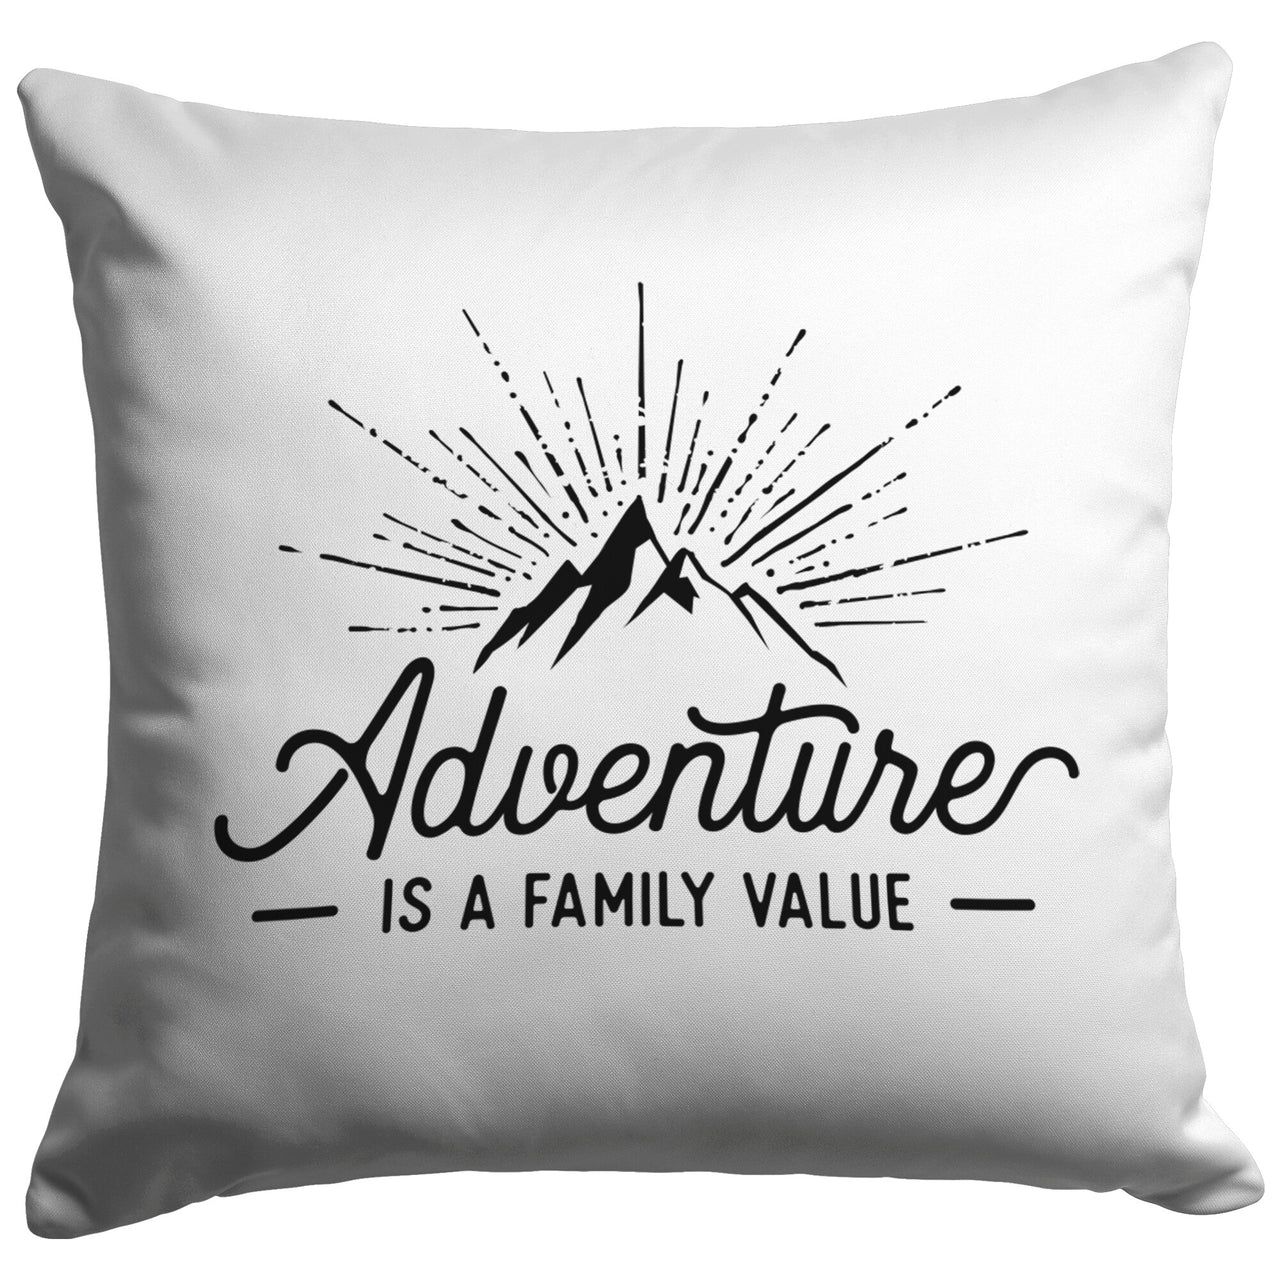 https://cdn.shopify.com/s/files/1/0488/5368/0290/products/Adventure_is_a_Family_Value_Pillow_Pillow_Straight_View_BACK_Mockup_png.jpg?v=1645743188&width=1280